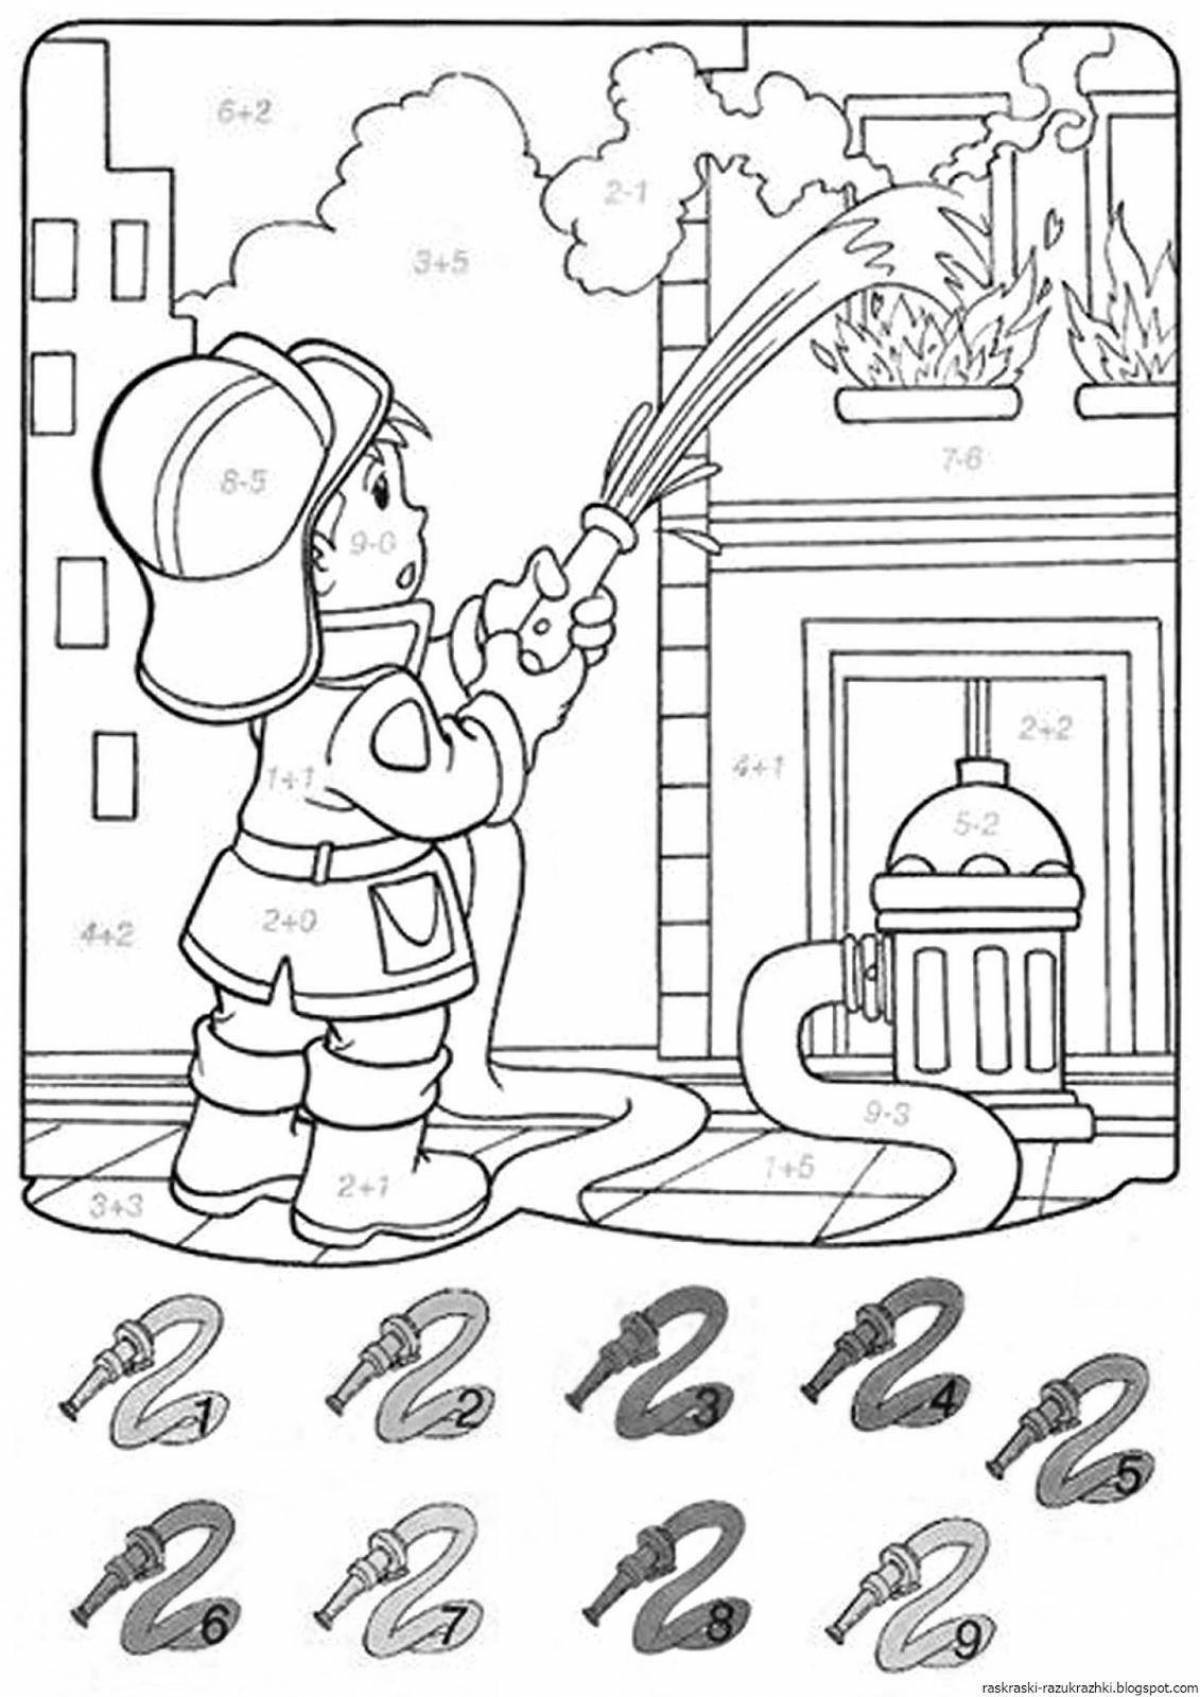 Radiant fire safety coloring page для детского сада